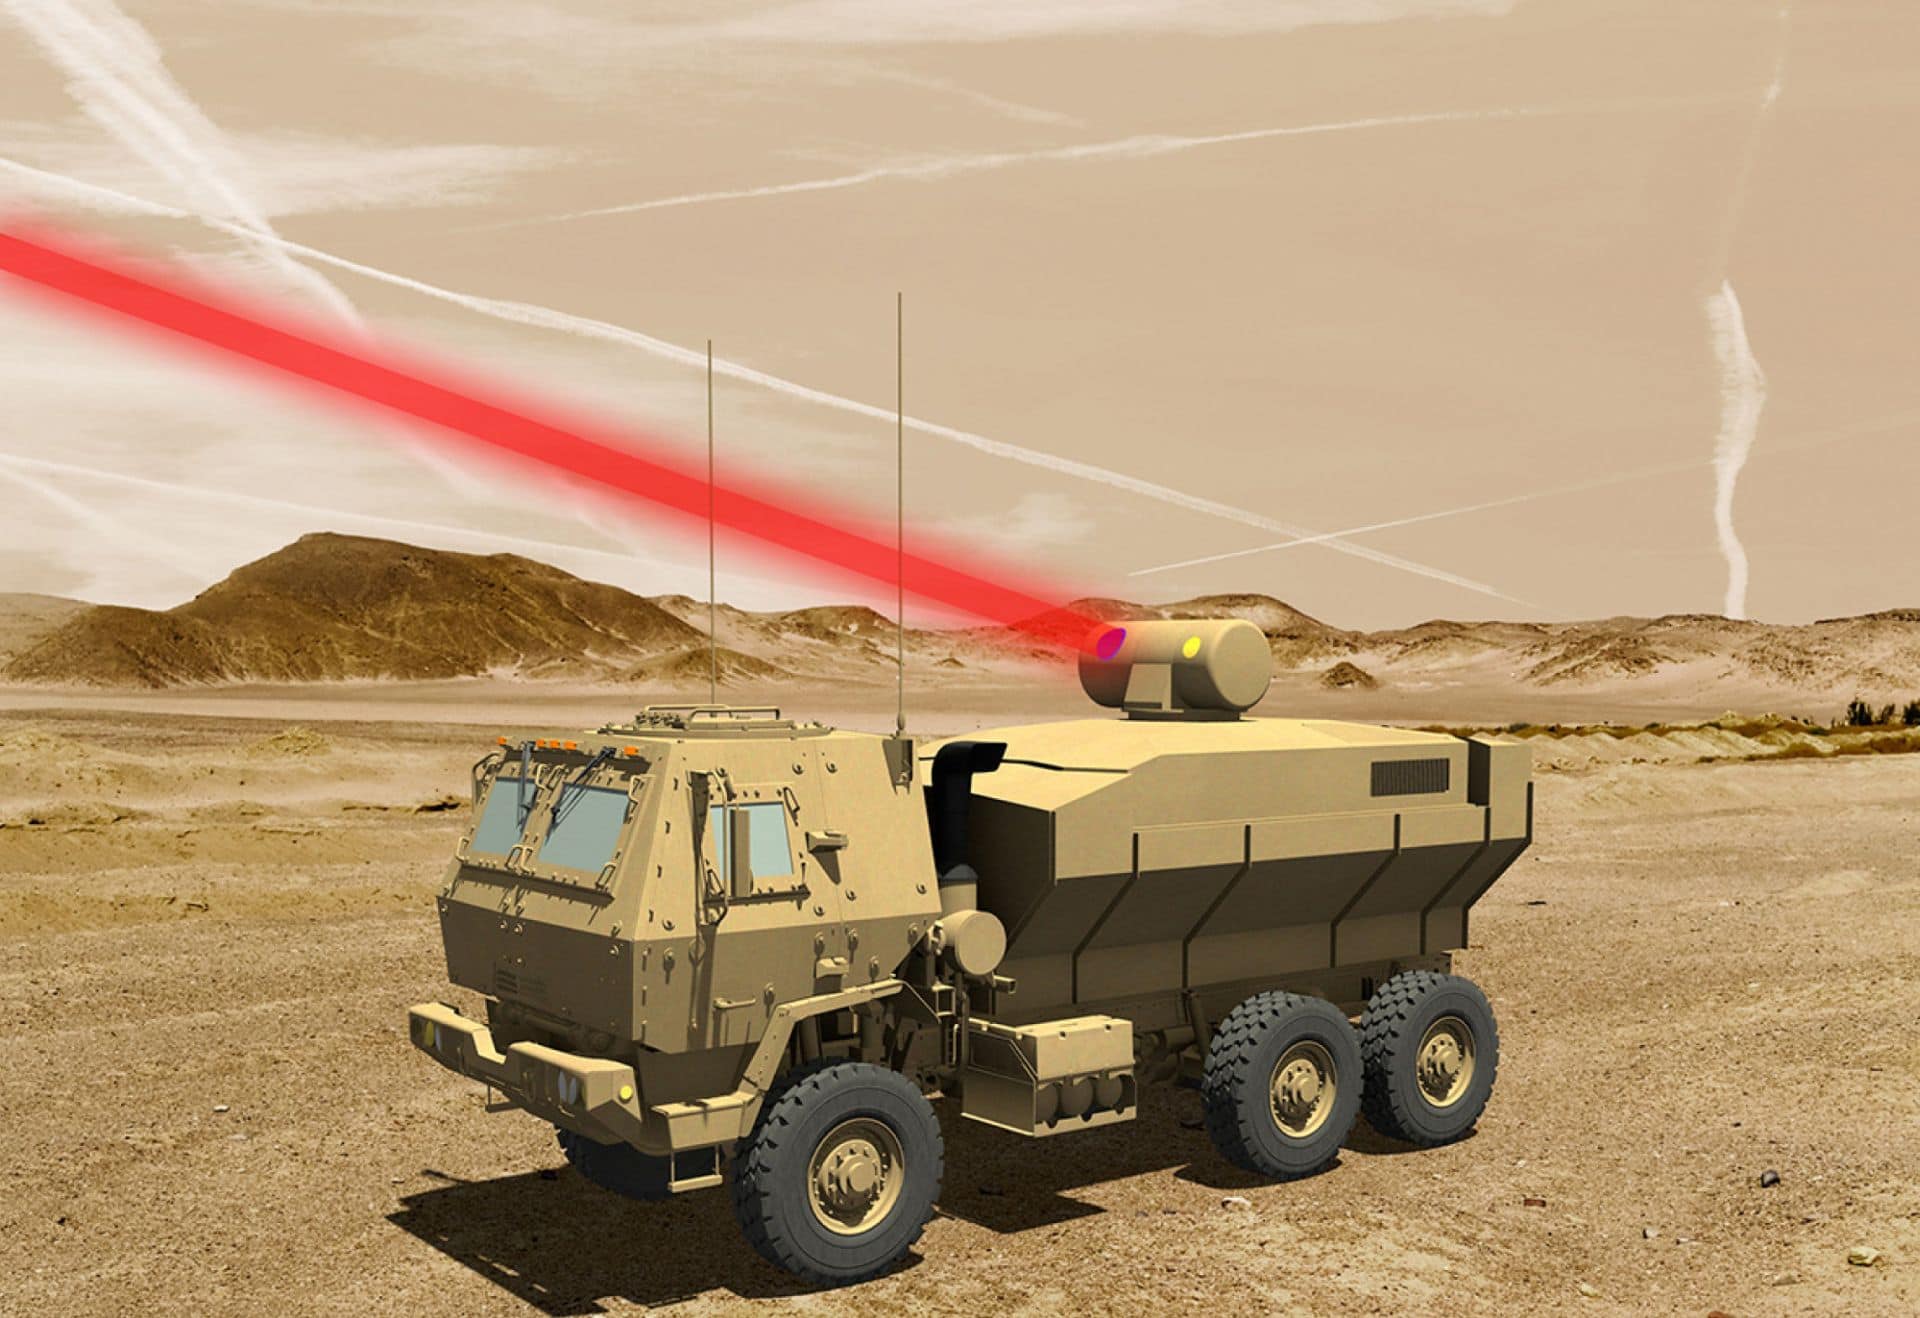 Lockheed to Deliver World Record-Setting 60kW Laser to U.S. Army